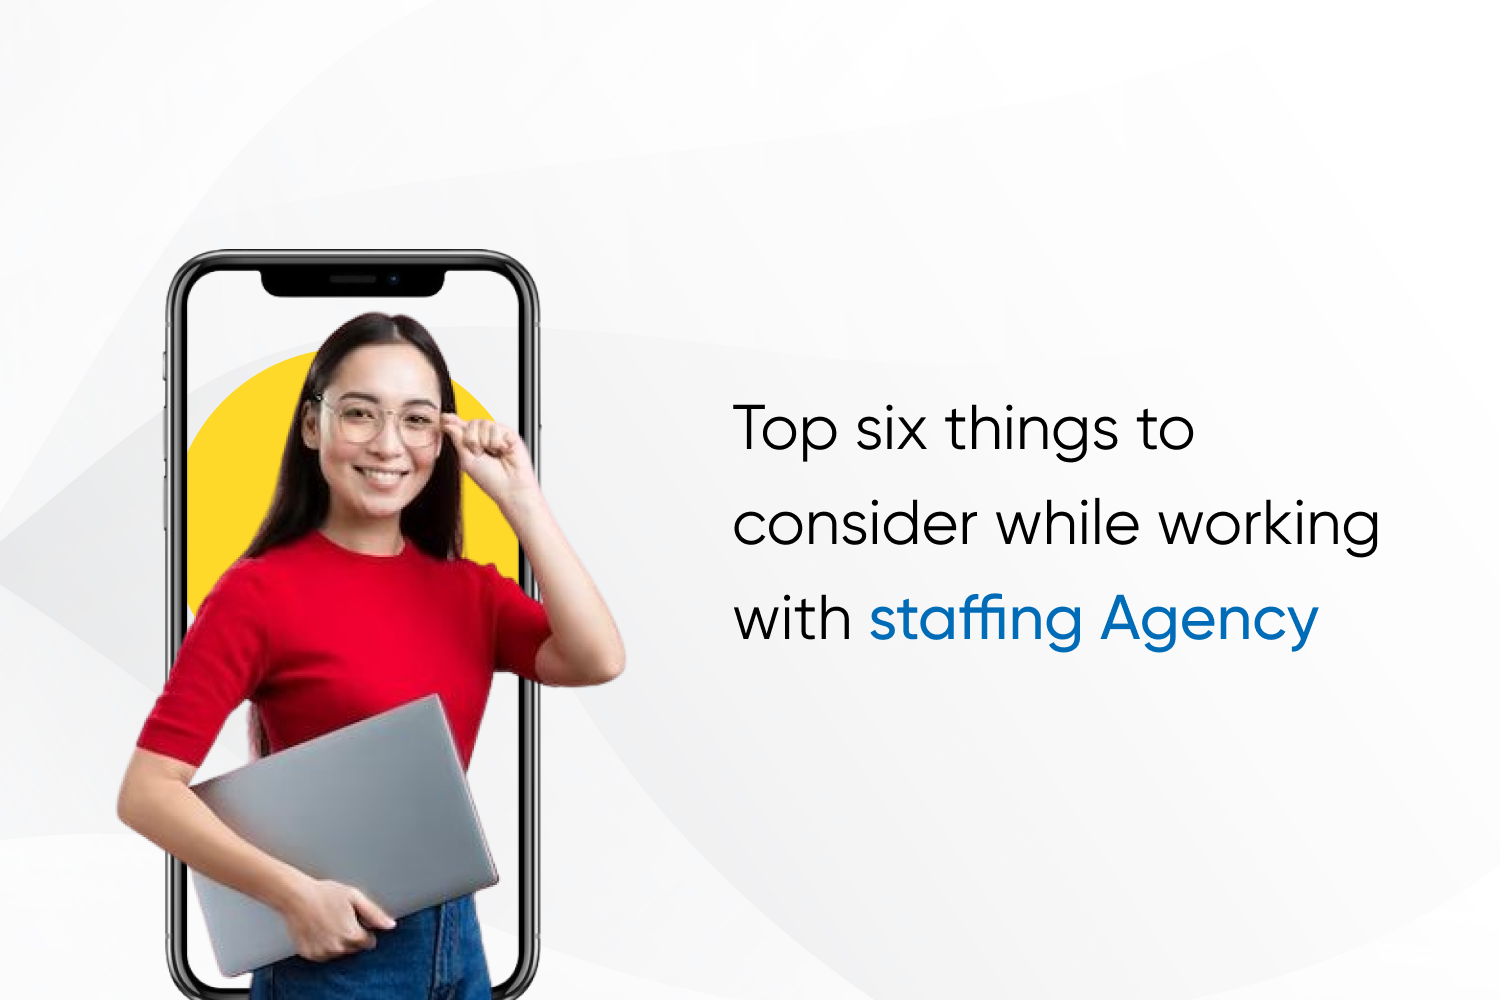 Top six things to consider while working with staffing Agency